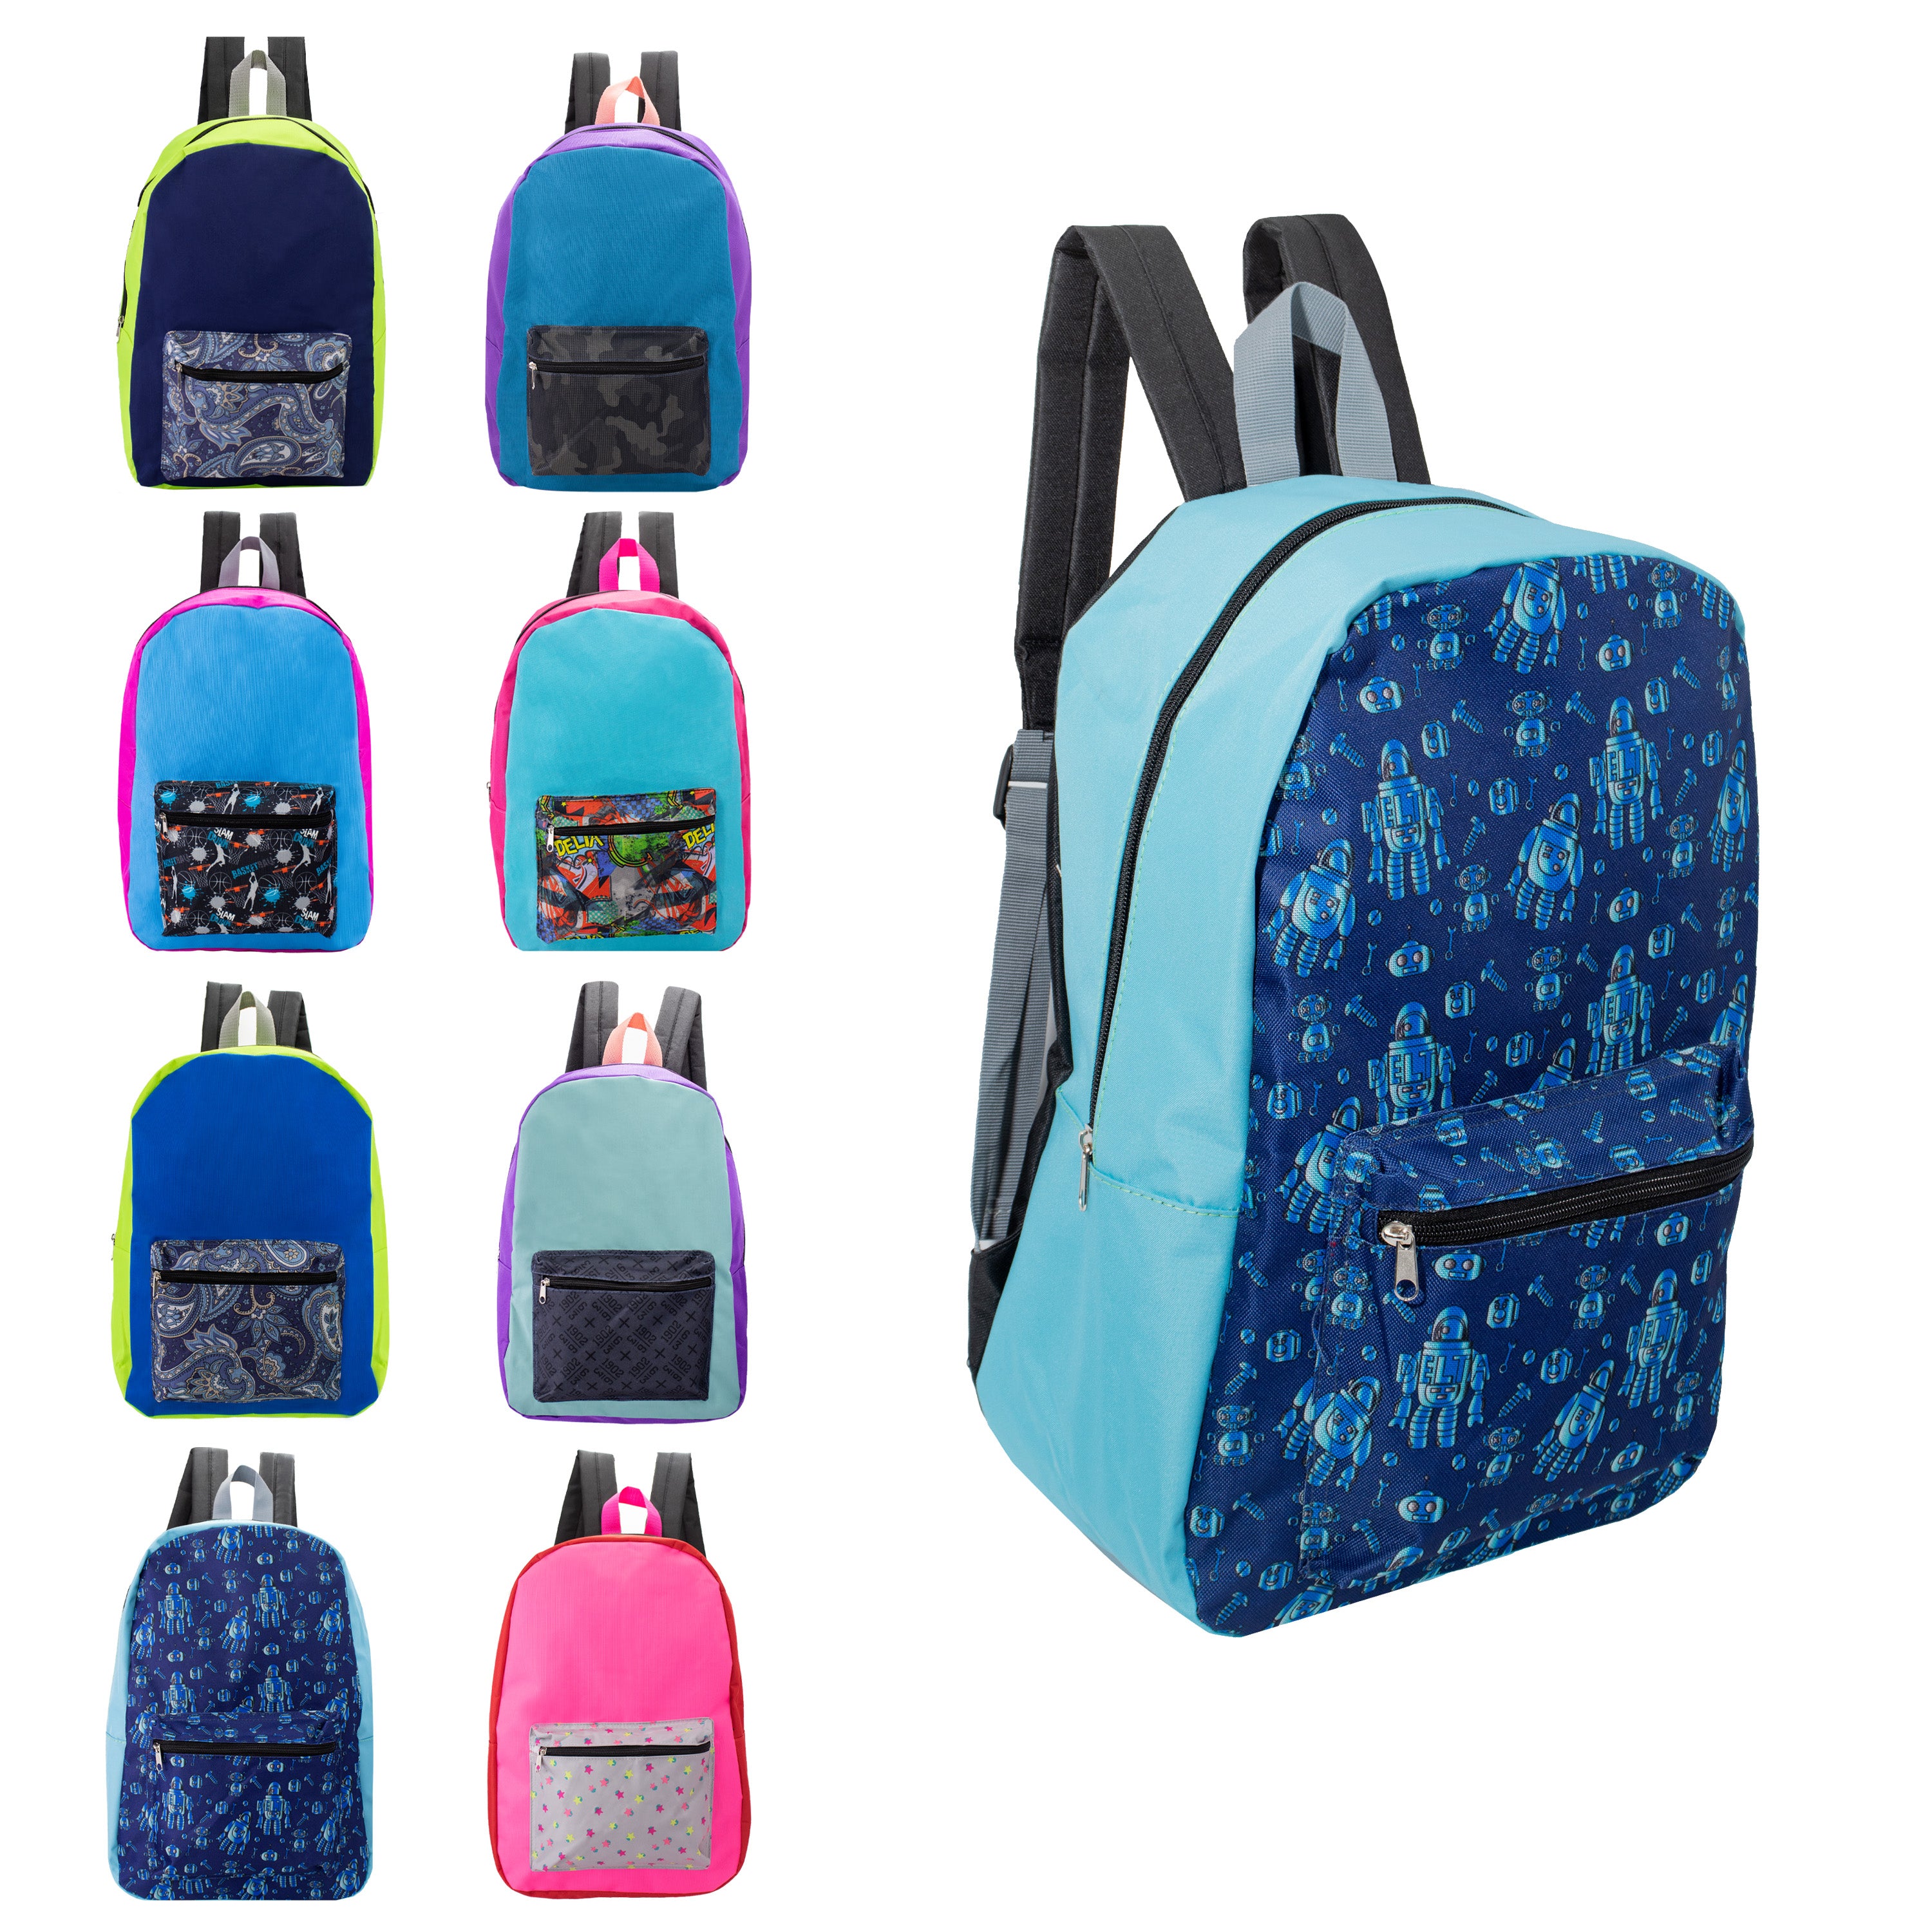 17 inches School Backpacks for Kids In Assorted Prints Bulk School Supplies Kit Case Of 12